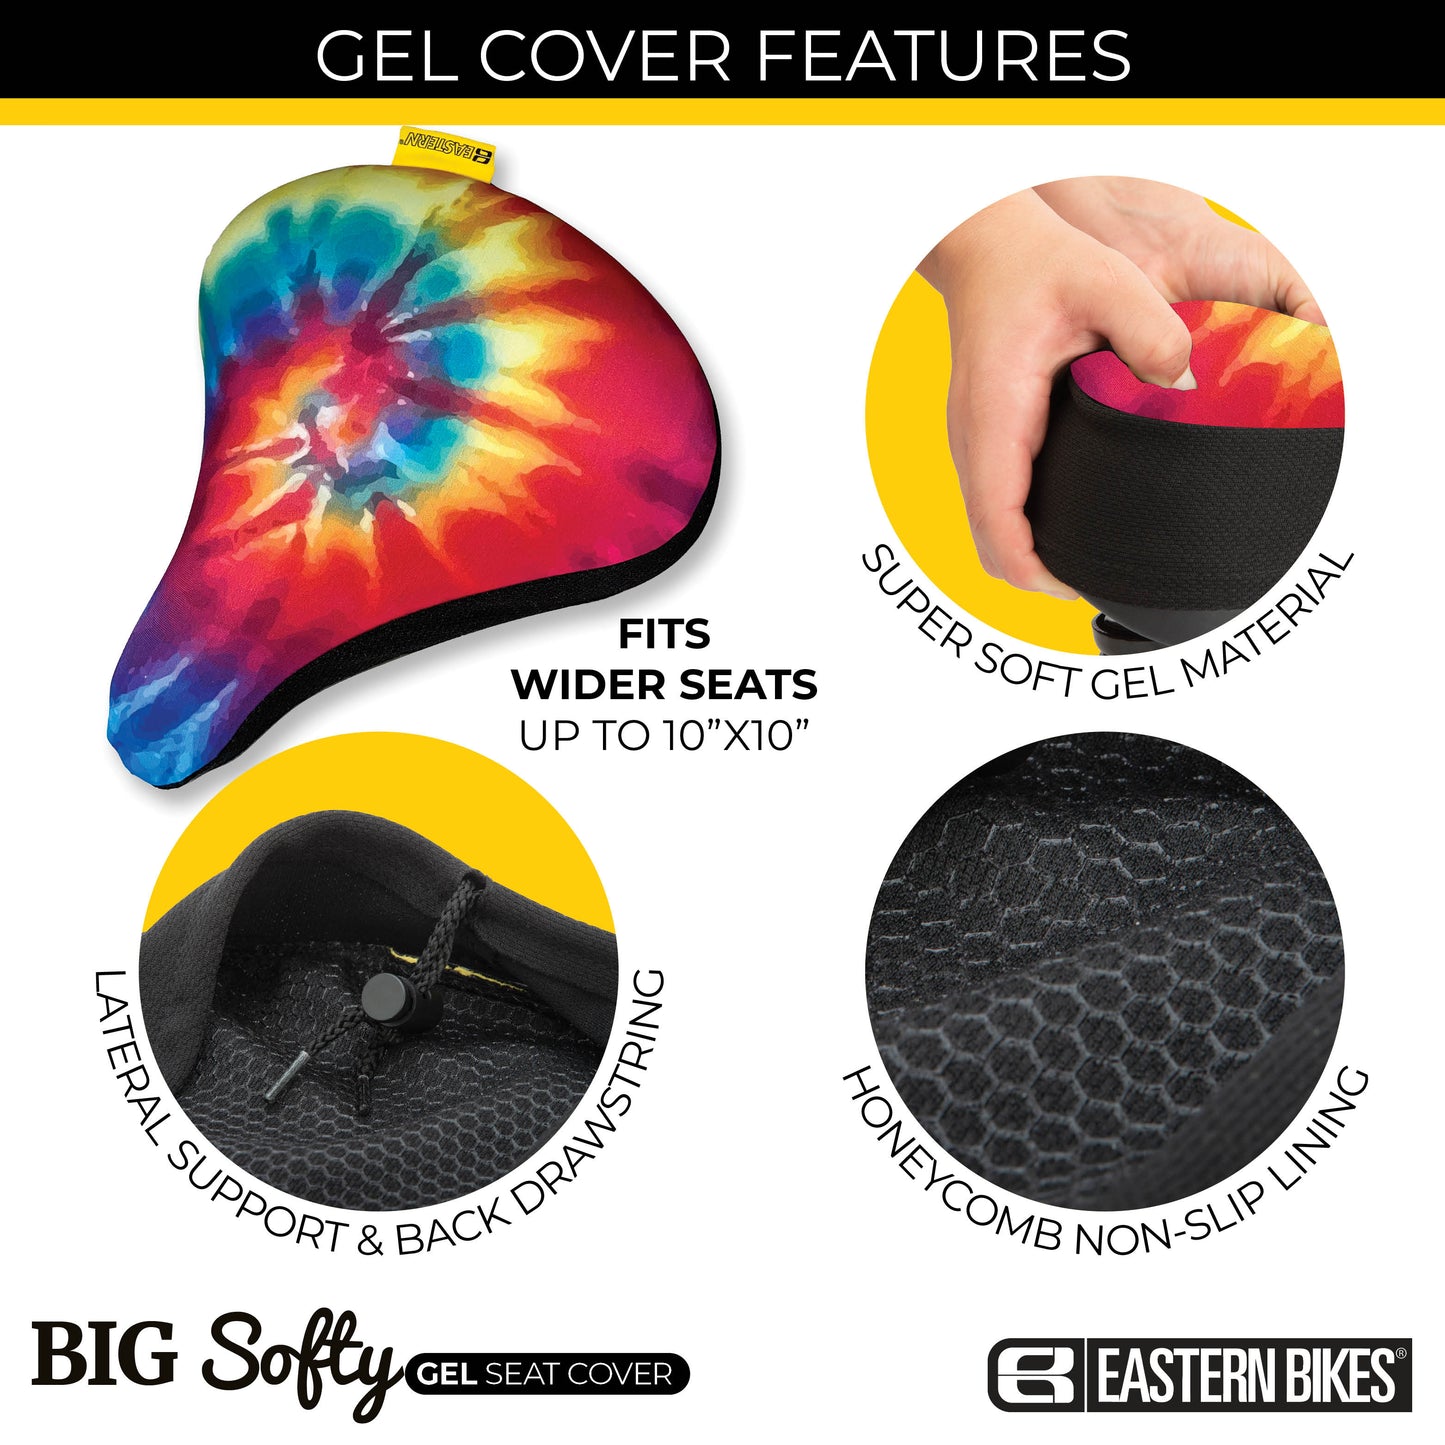 Big Softy Gel Seat Cover Tiedye (large)